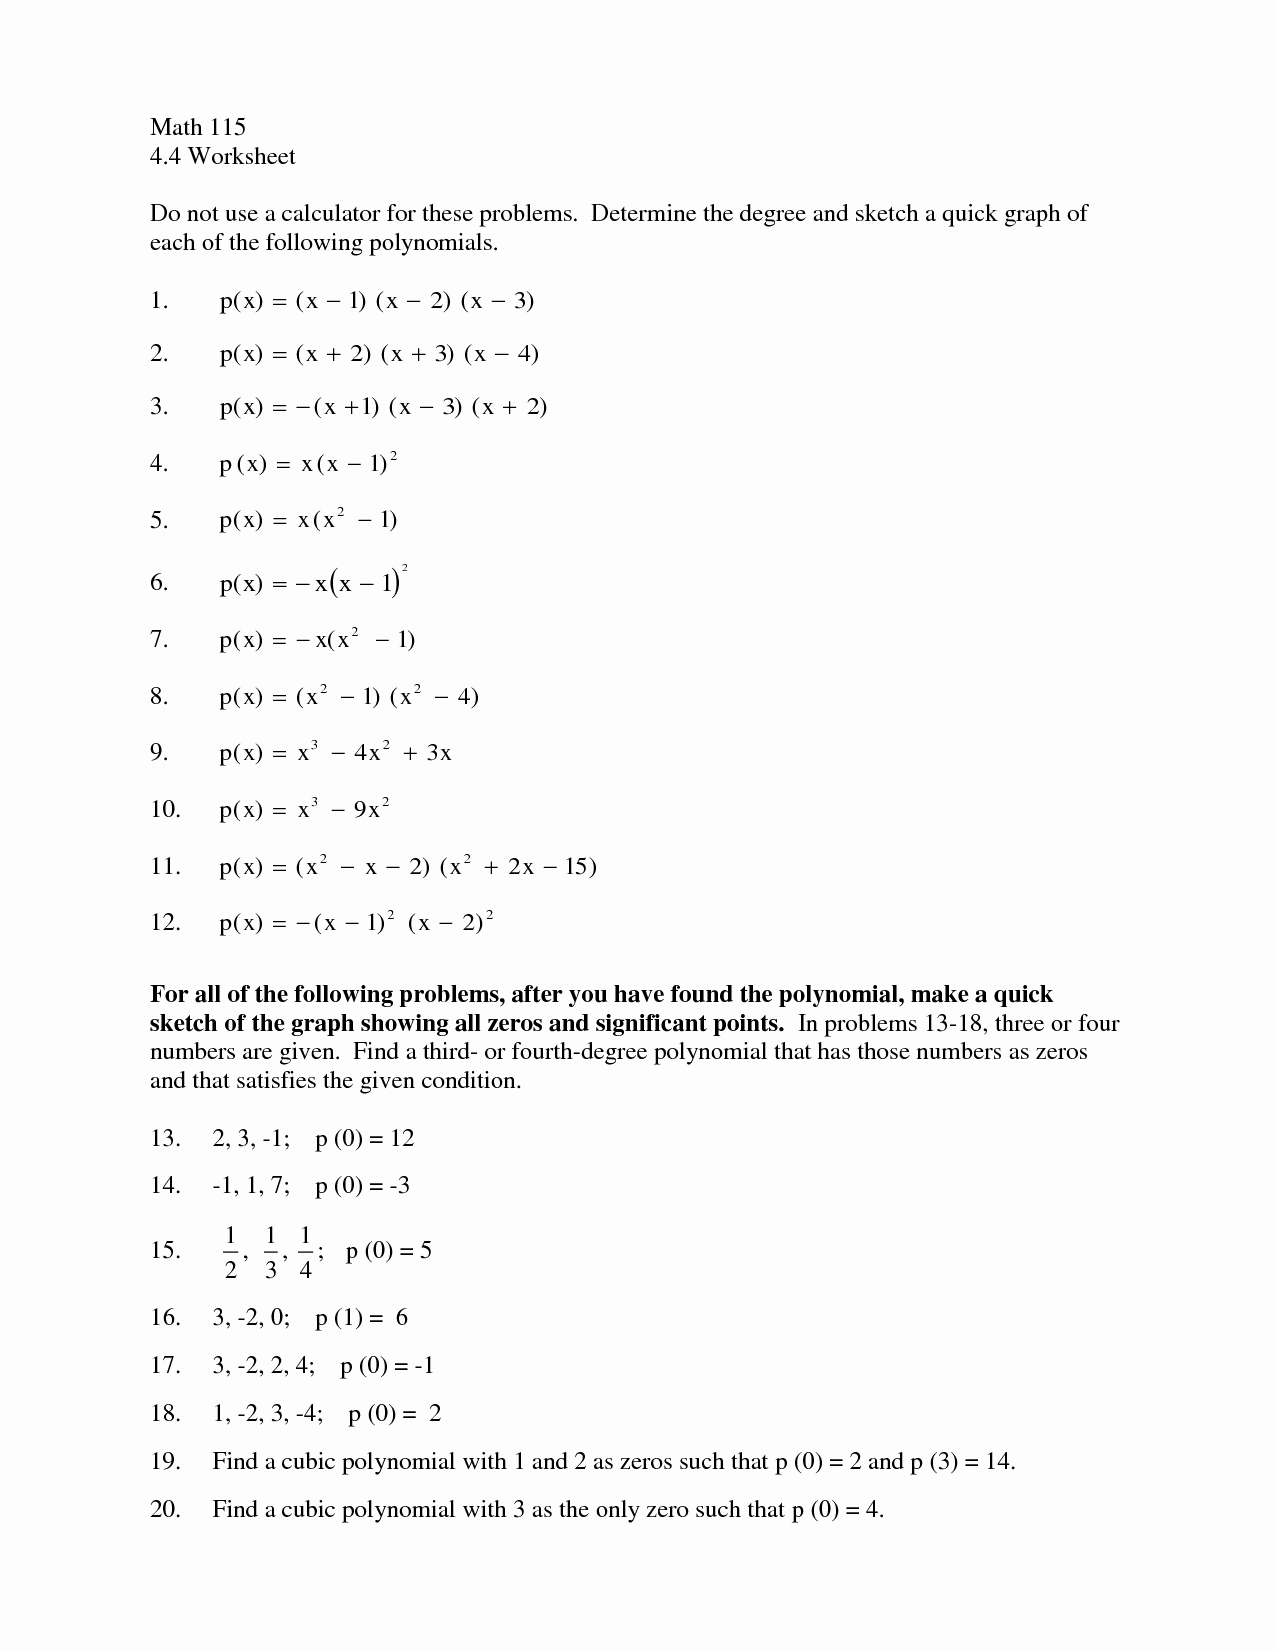 50 Multiplying Polynomials Worksheet Answers Chessmuseum Template Library